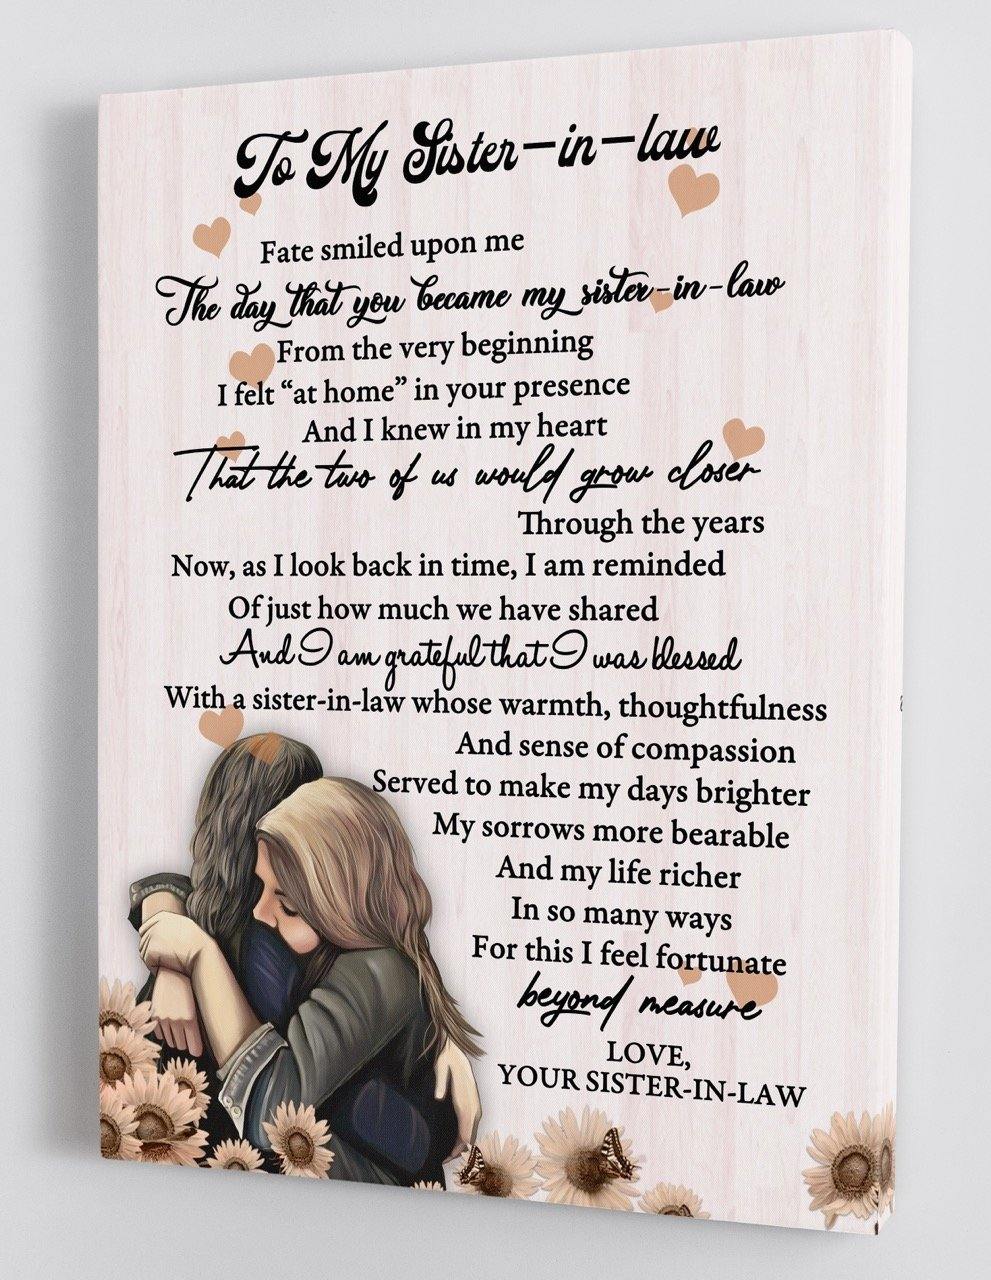 To My Sister-in-law - Love From Sister-in-law - Framed Canvas Gift SS004 - DivesArt LLC